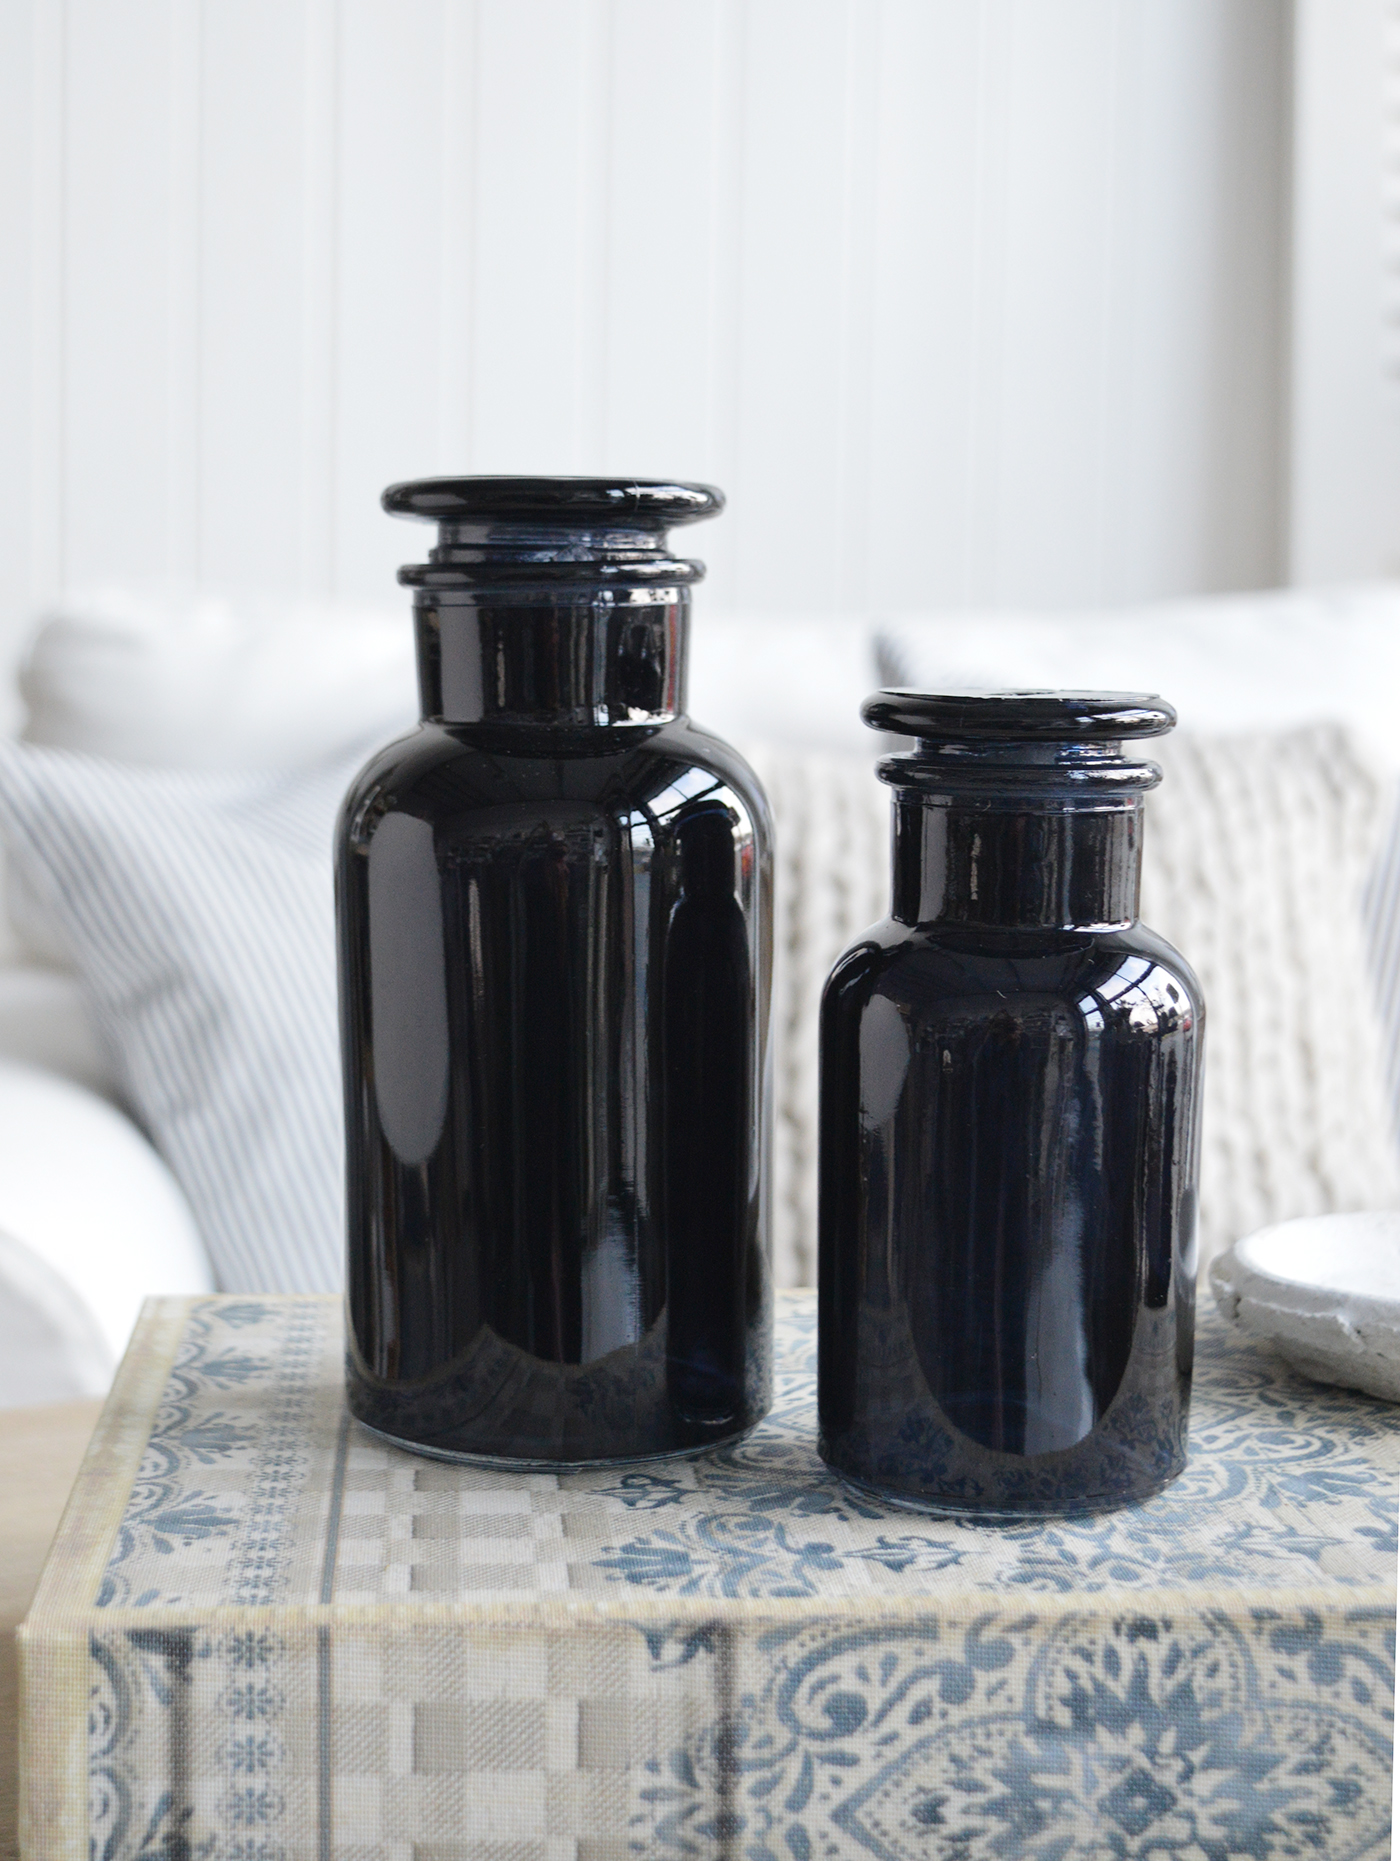 Decorative Apothecary blue black glass bottle with stopper from The White Lighthouse New England furniture and home accessories for country, coastal and city homes and iteriors